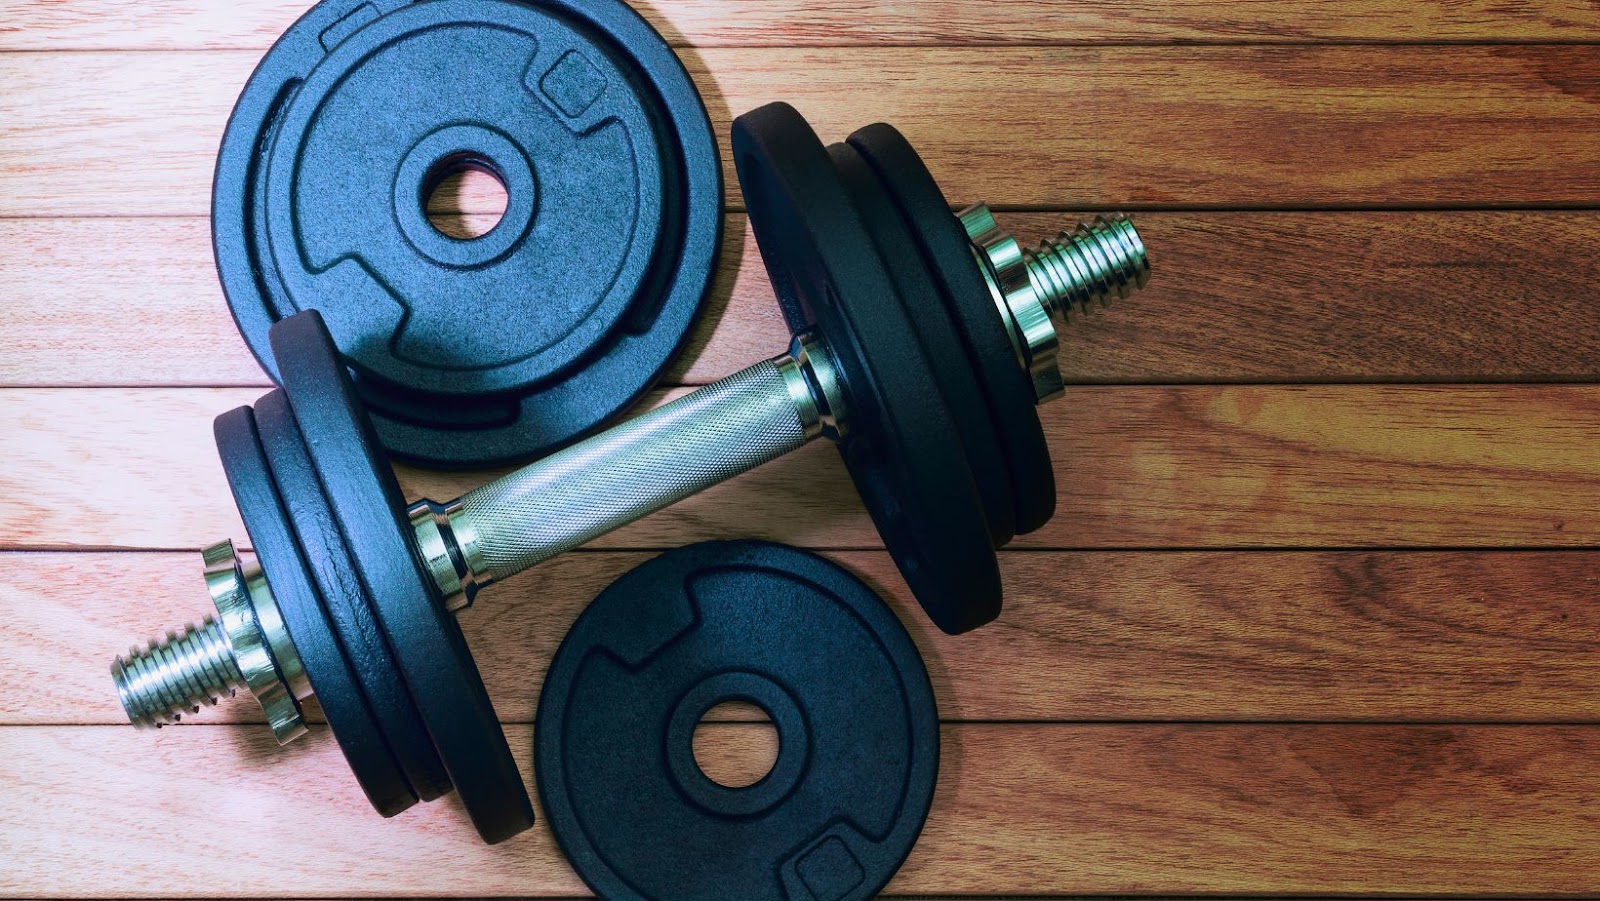 3 Popular Bench Press Exercises And Their Benefits